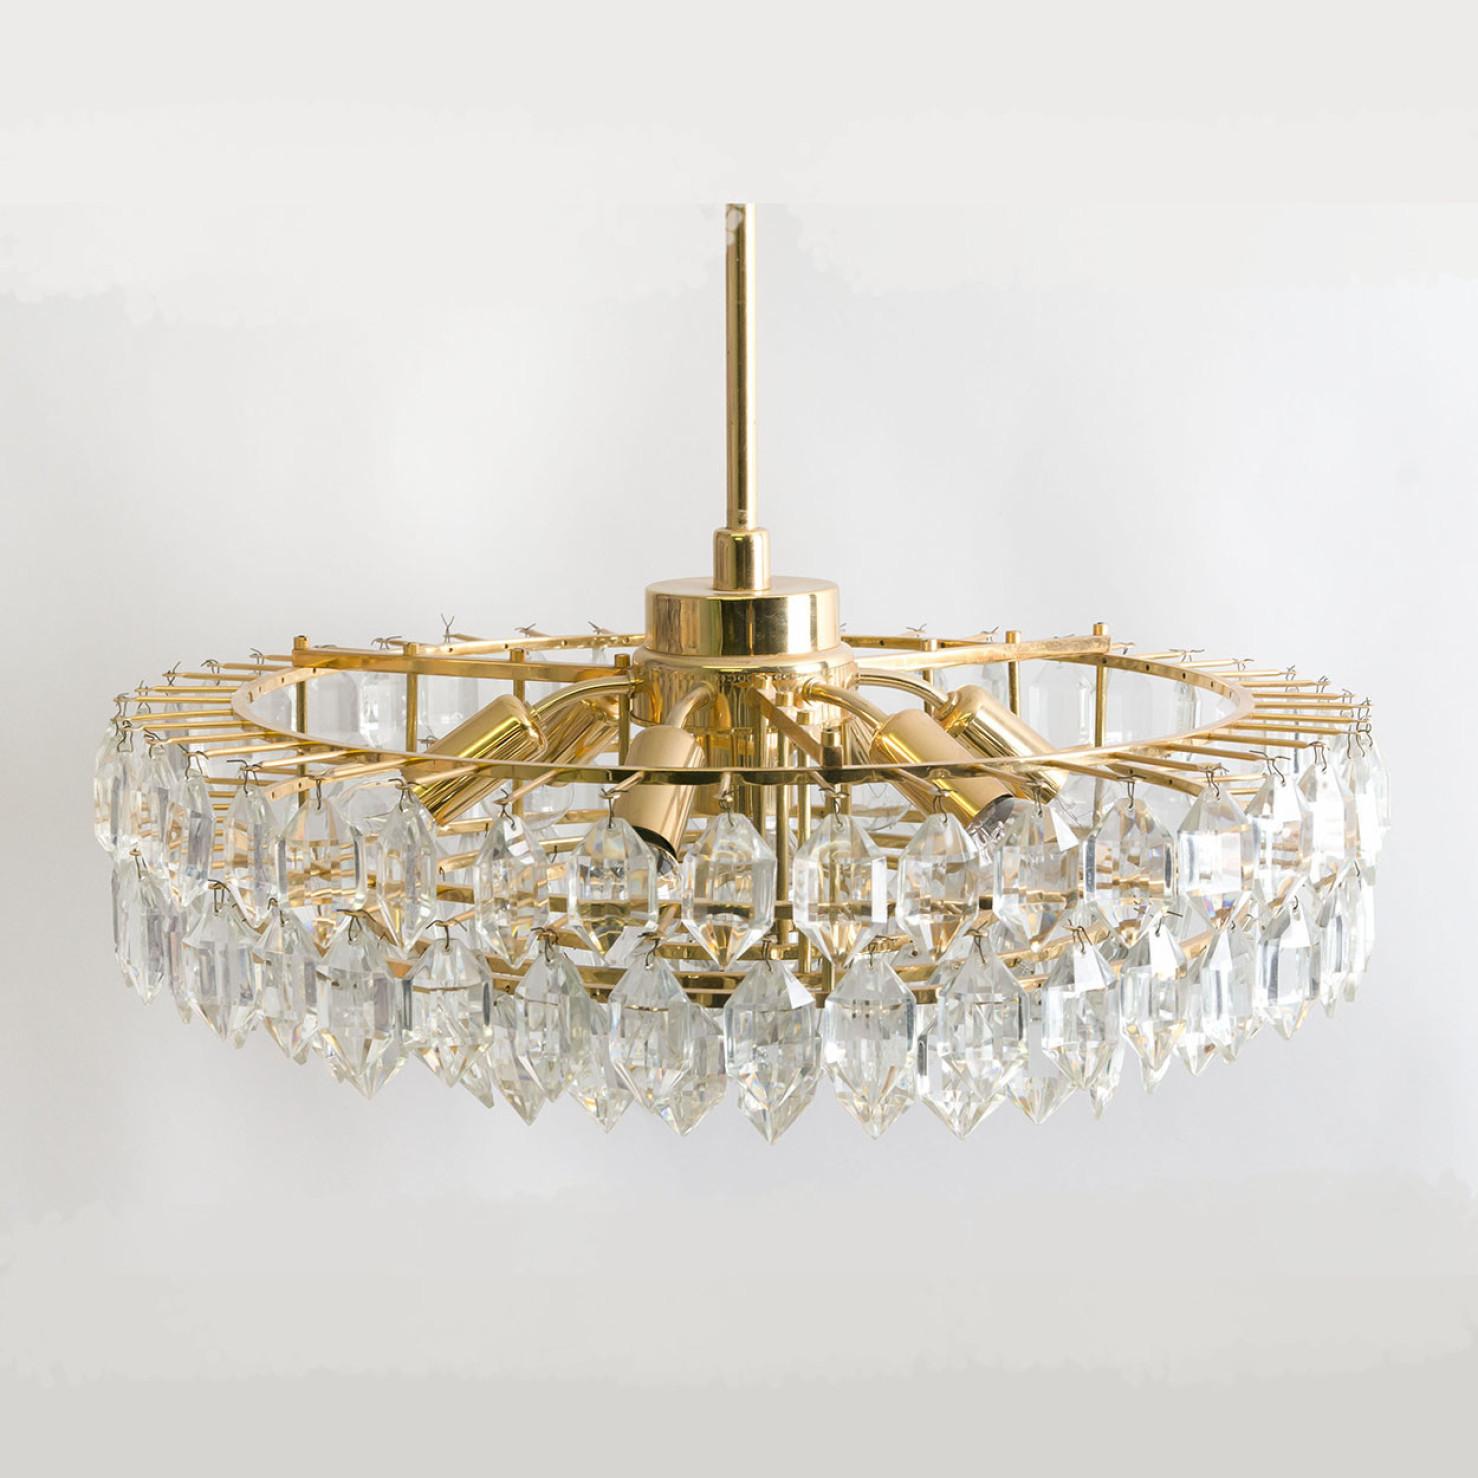 Pair of Bakalowits & Sohne Chandeliers, Brass and Crystal Glass, Austria, 1960s In Good Condition For Sale In Rijssen, NL